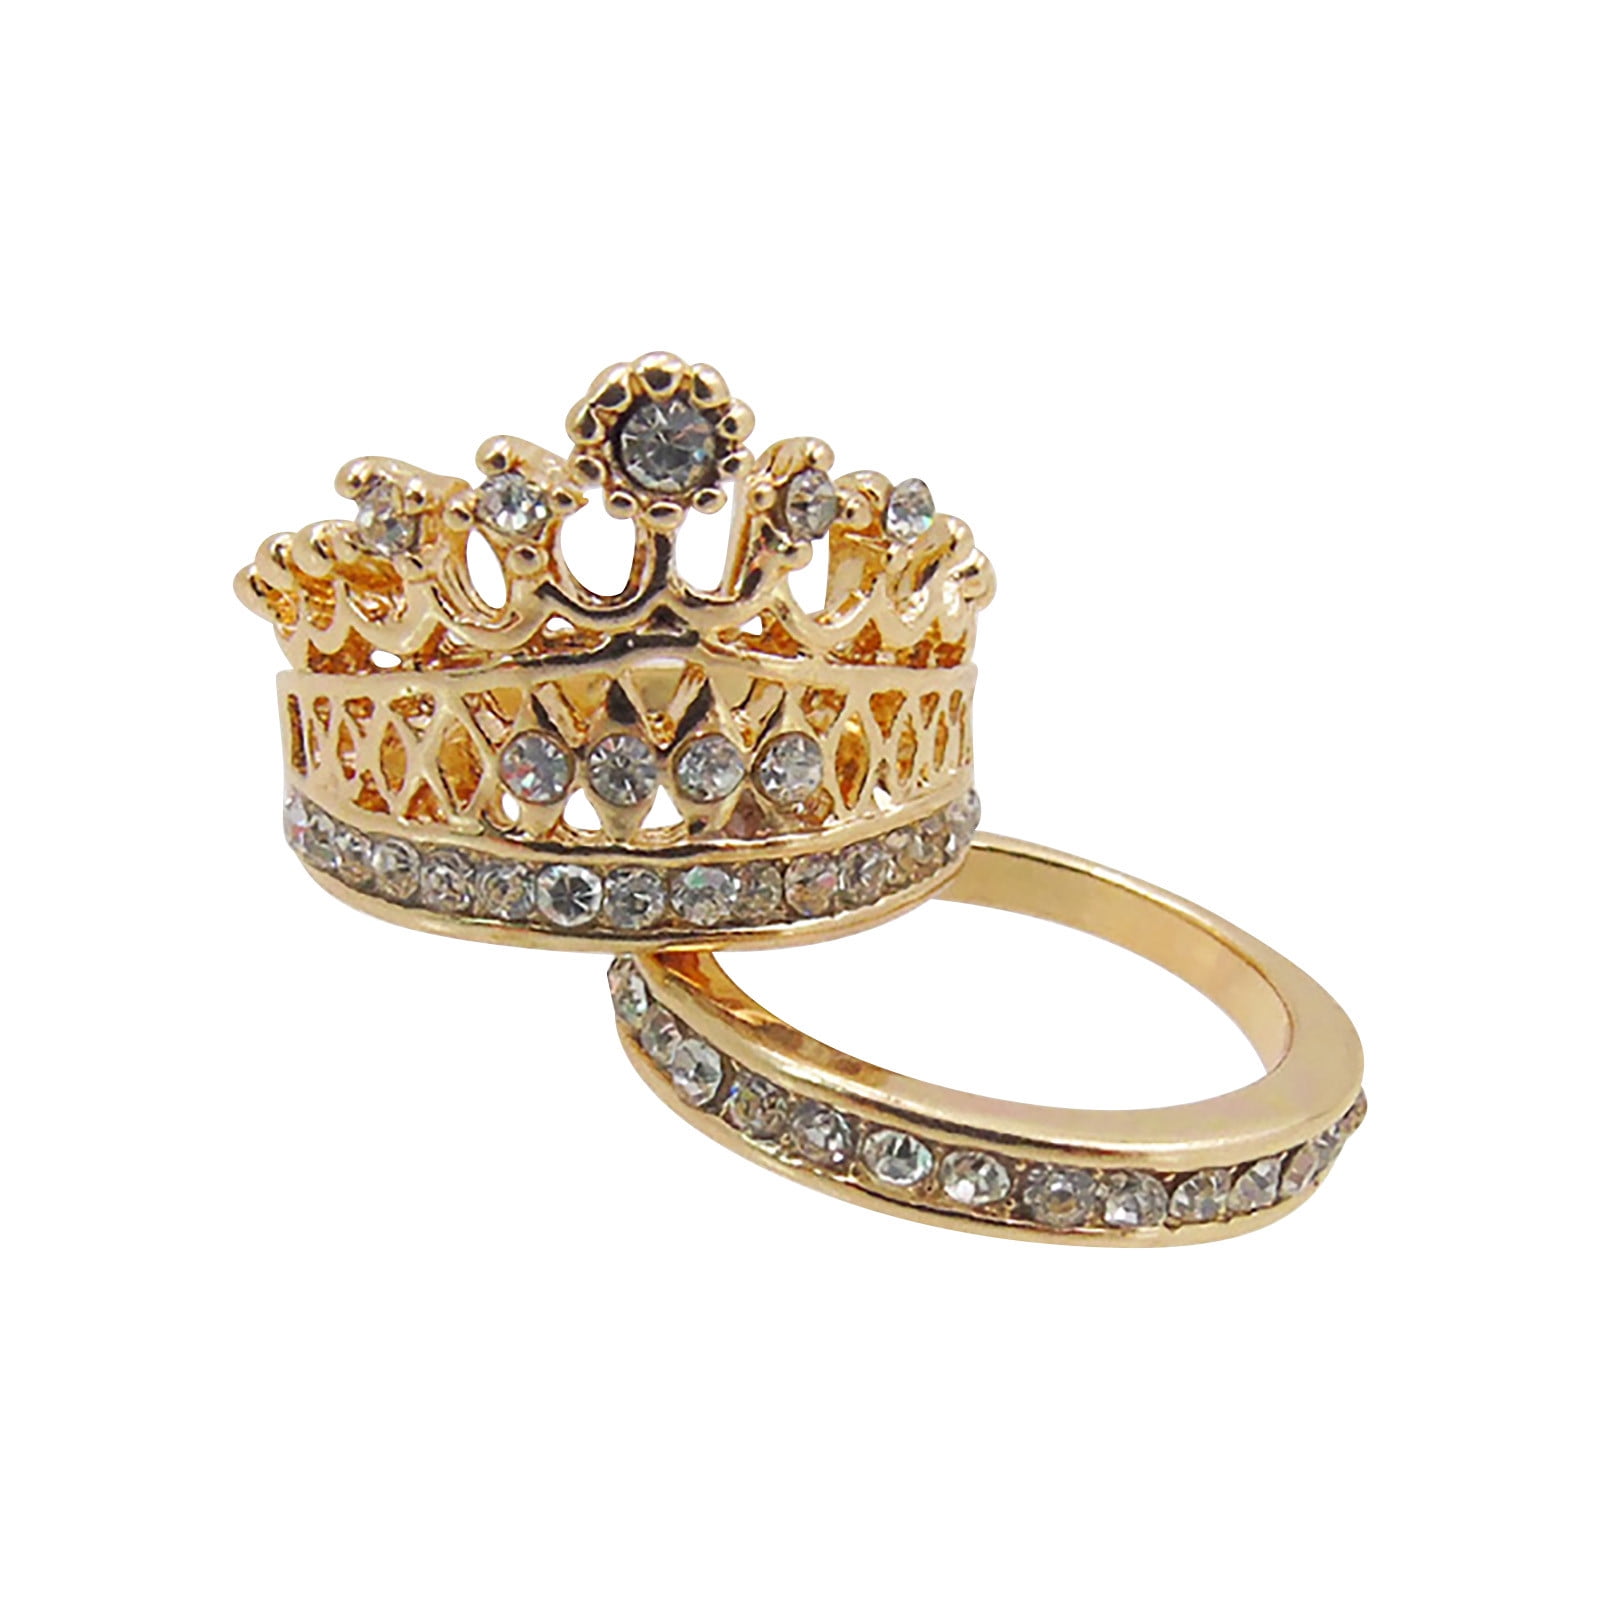 Exclusive ring in the shape of a royal crown made Vector Image